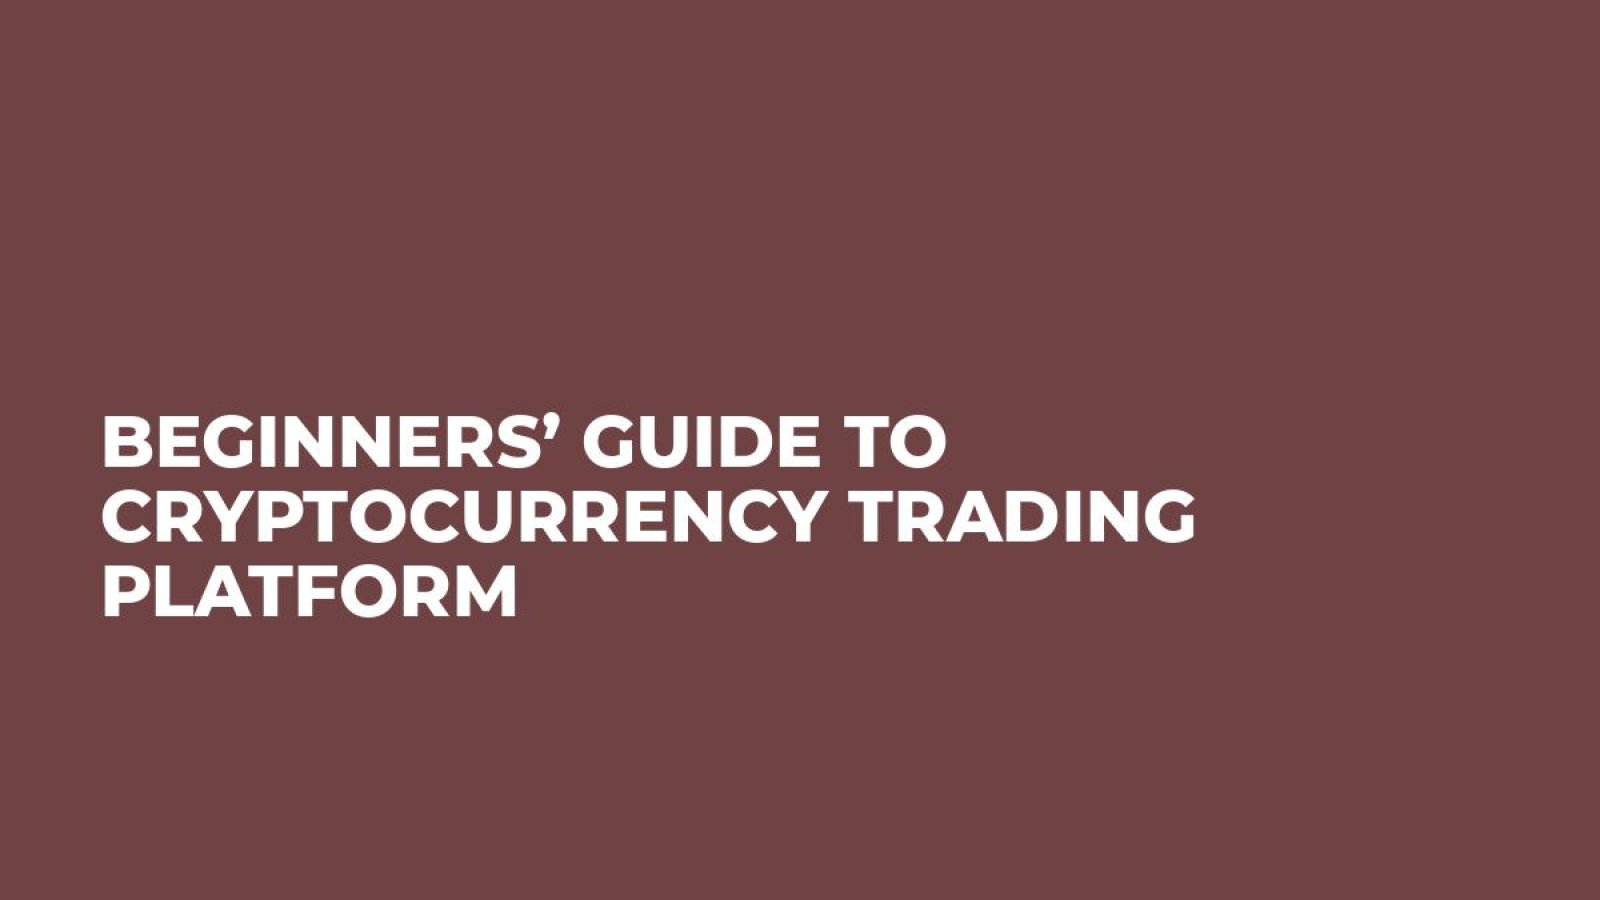 Beginners’ Guide to Cryptocurrency Trading Platform